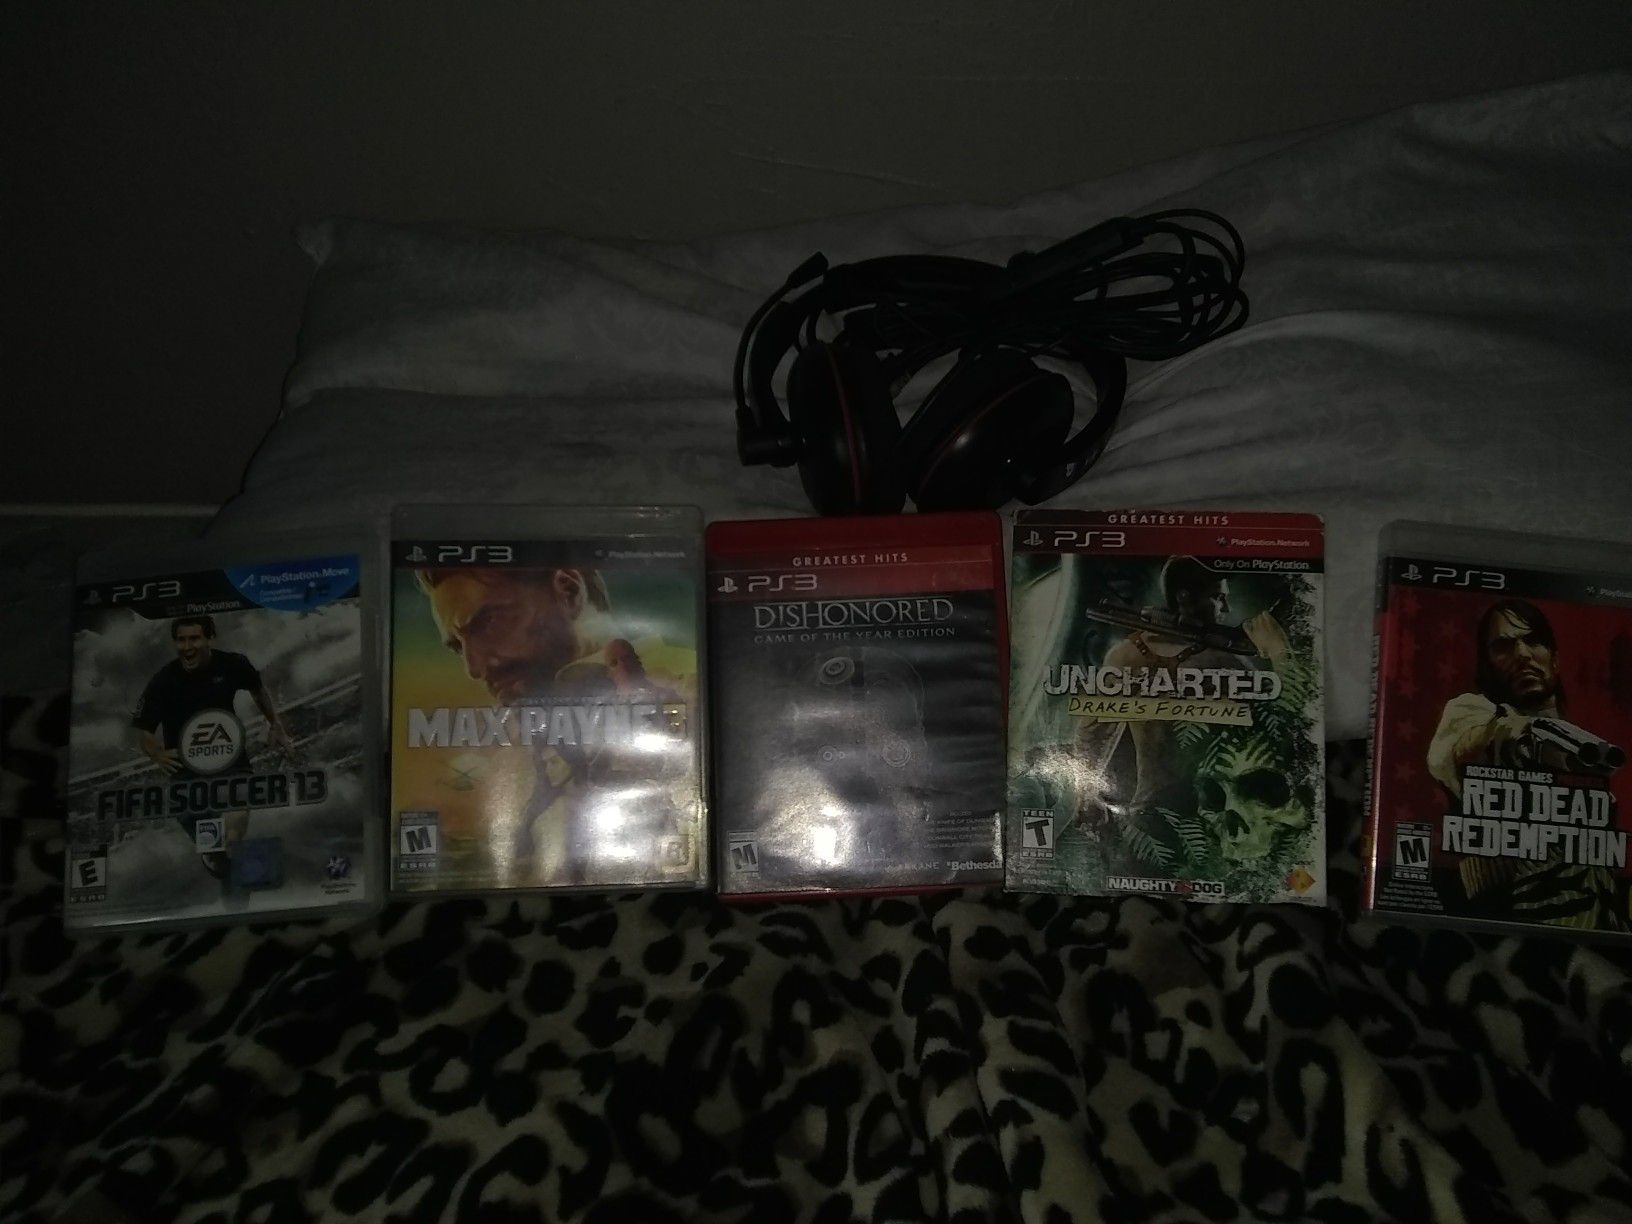 PlayStation 3 games/turtle Beach gaming headset